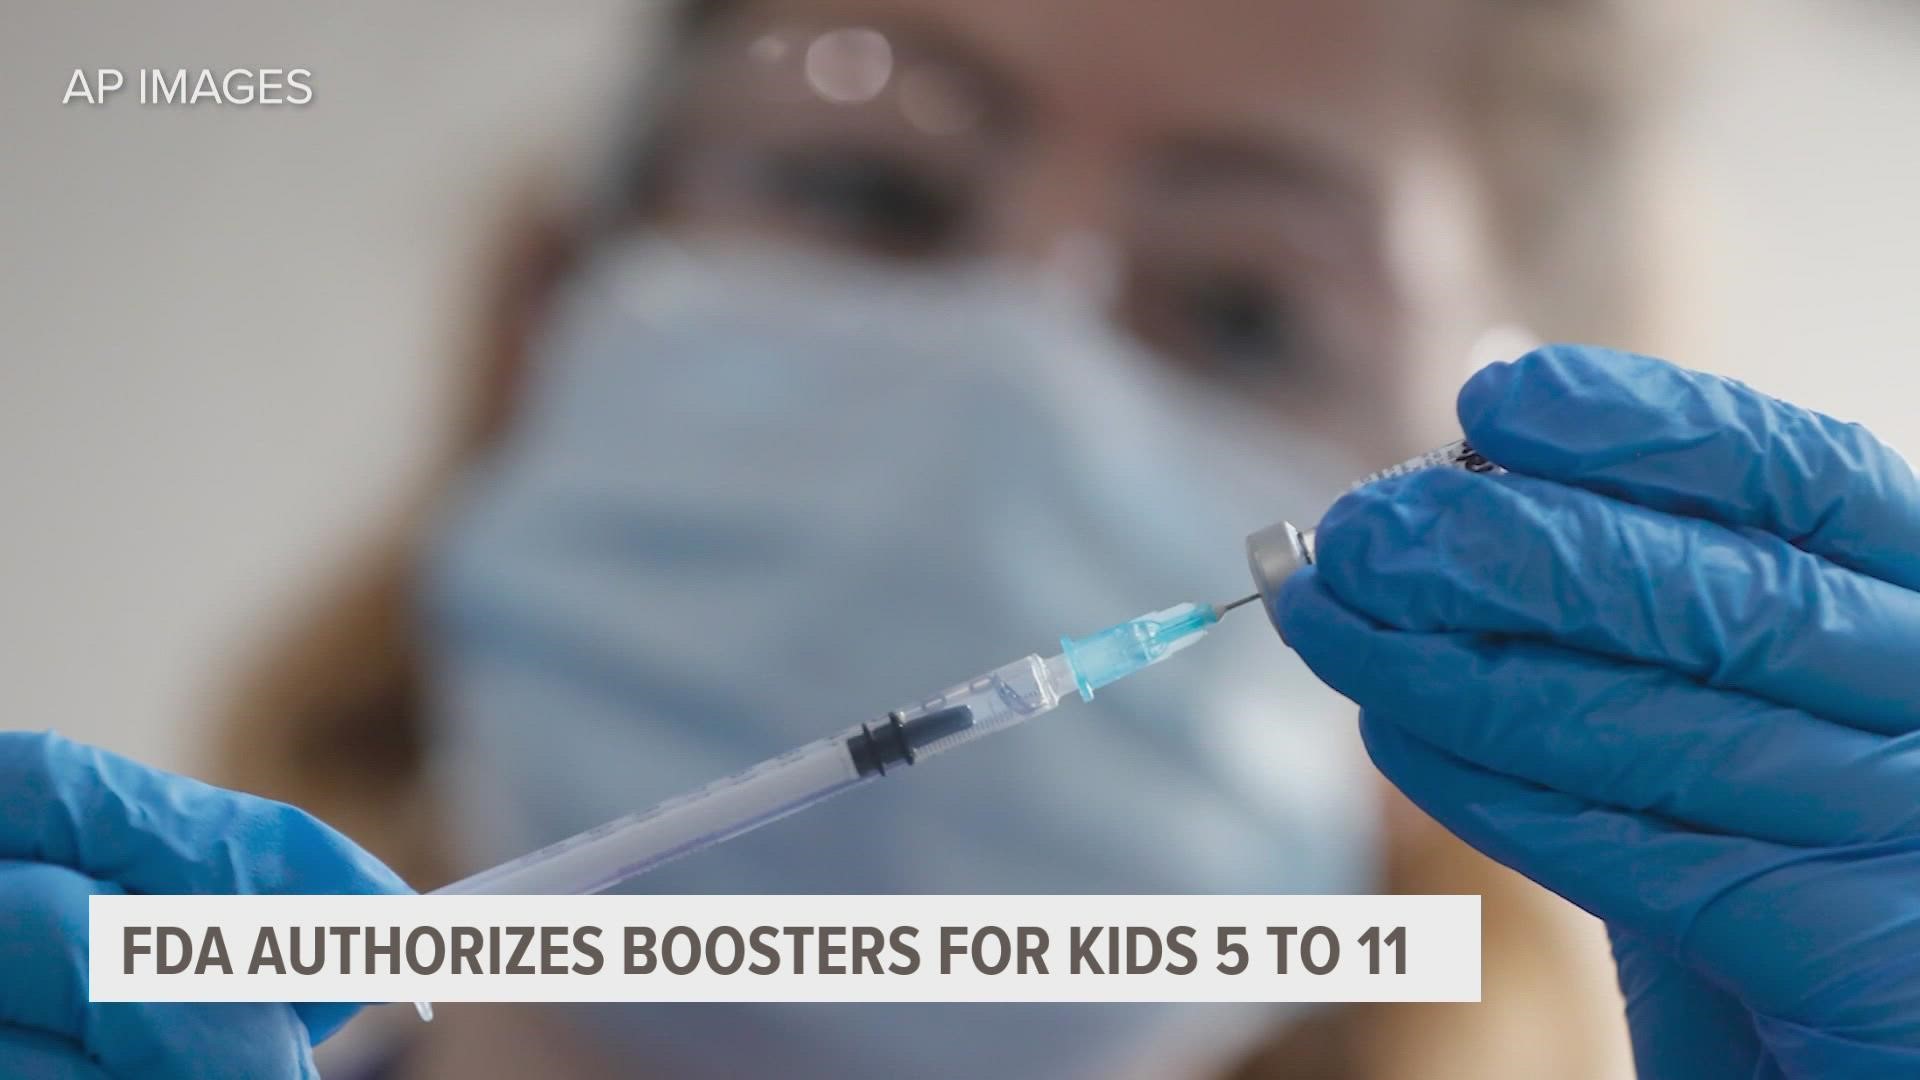 Two moms share their thoughts on booster shots for kids 5 to 11.